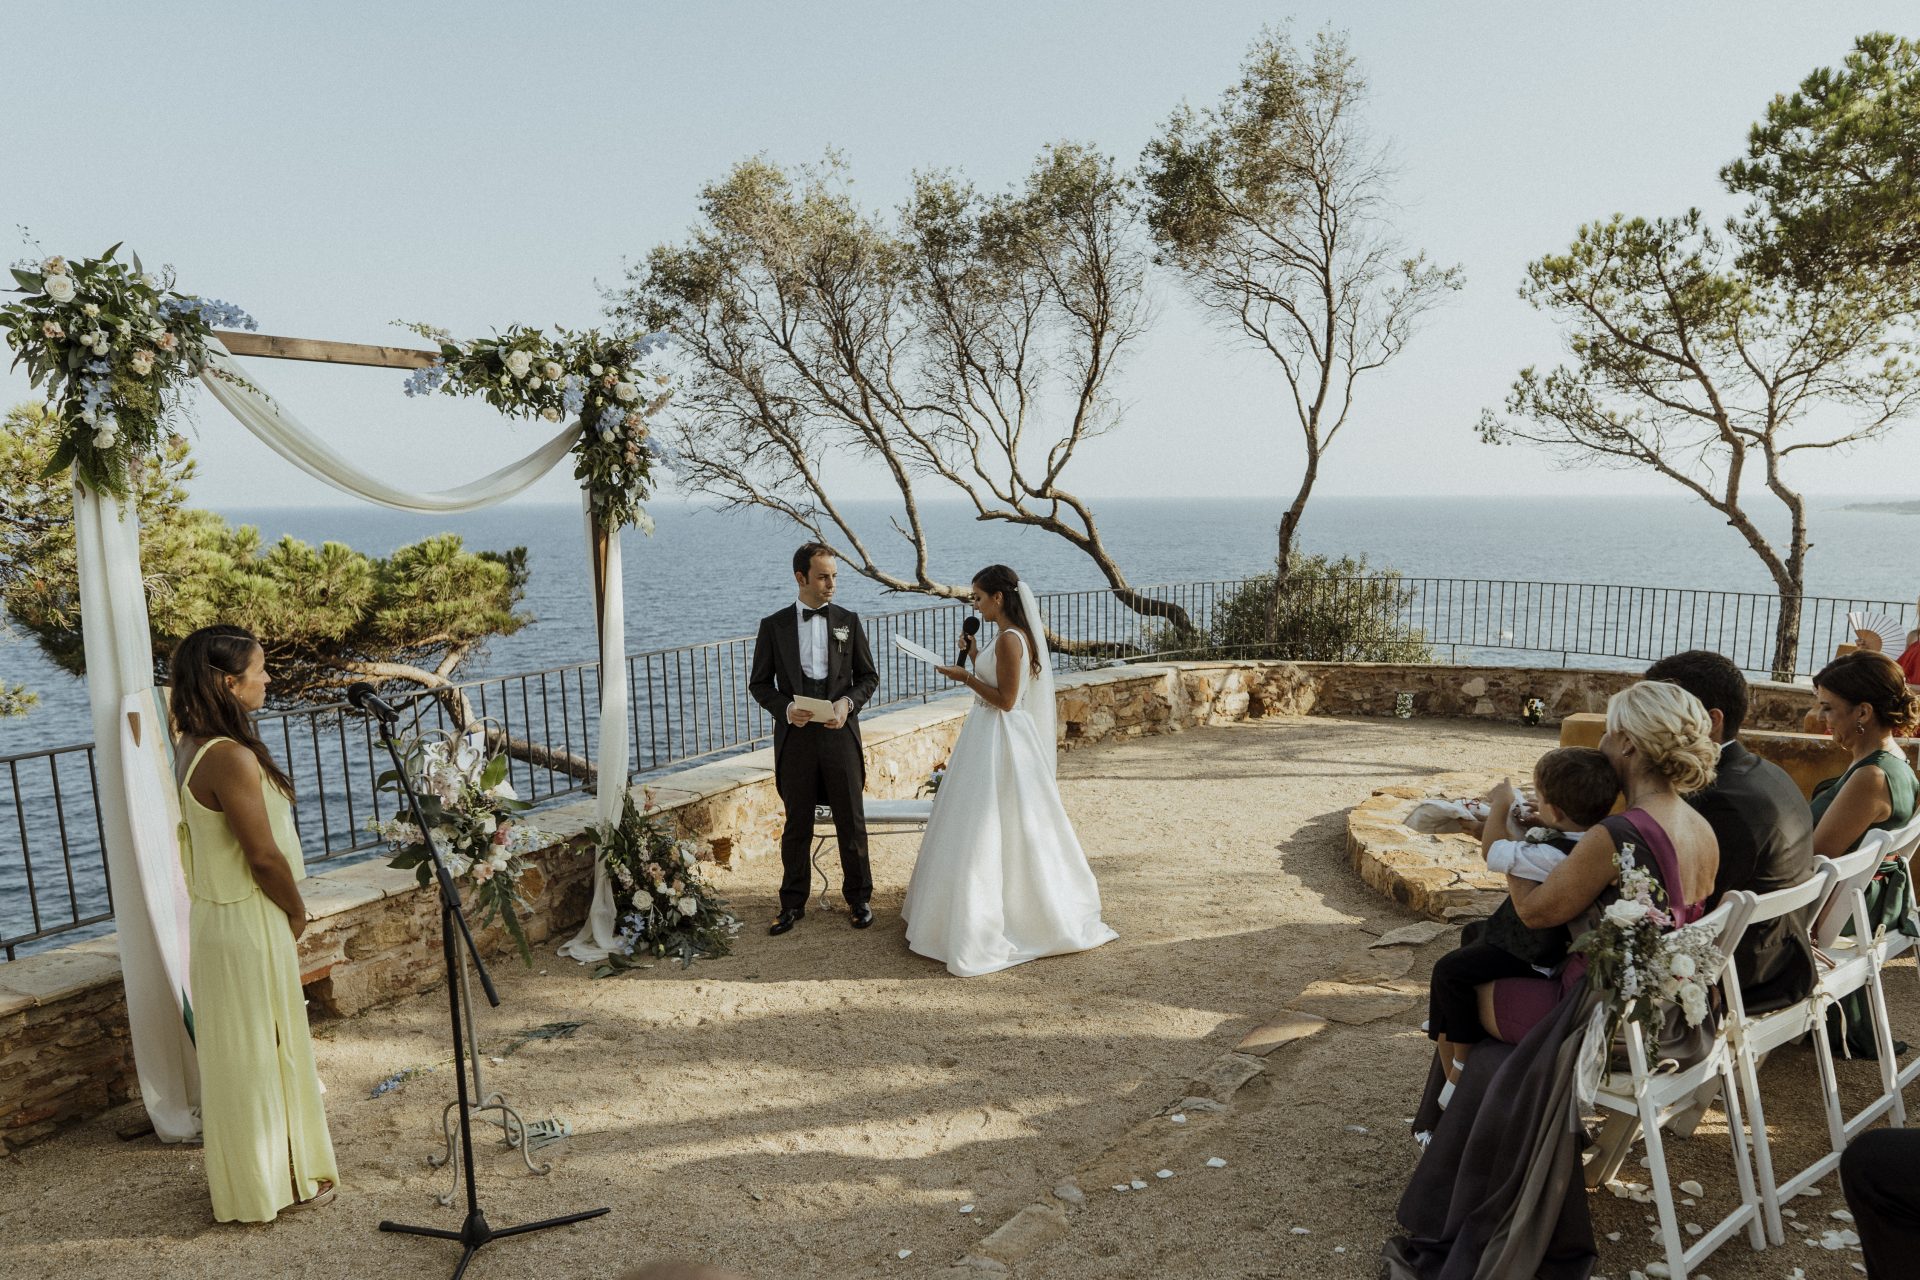 Wedding photographer and videographer at Convent de Blanes in Costa Brava